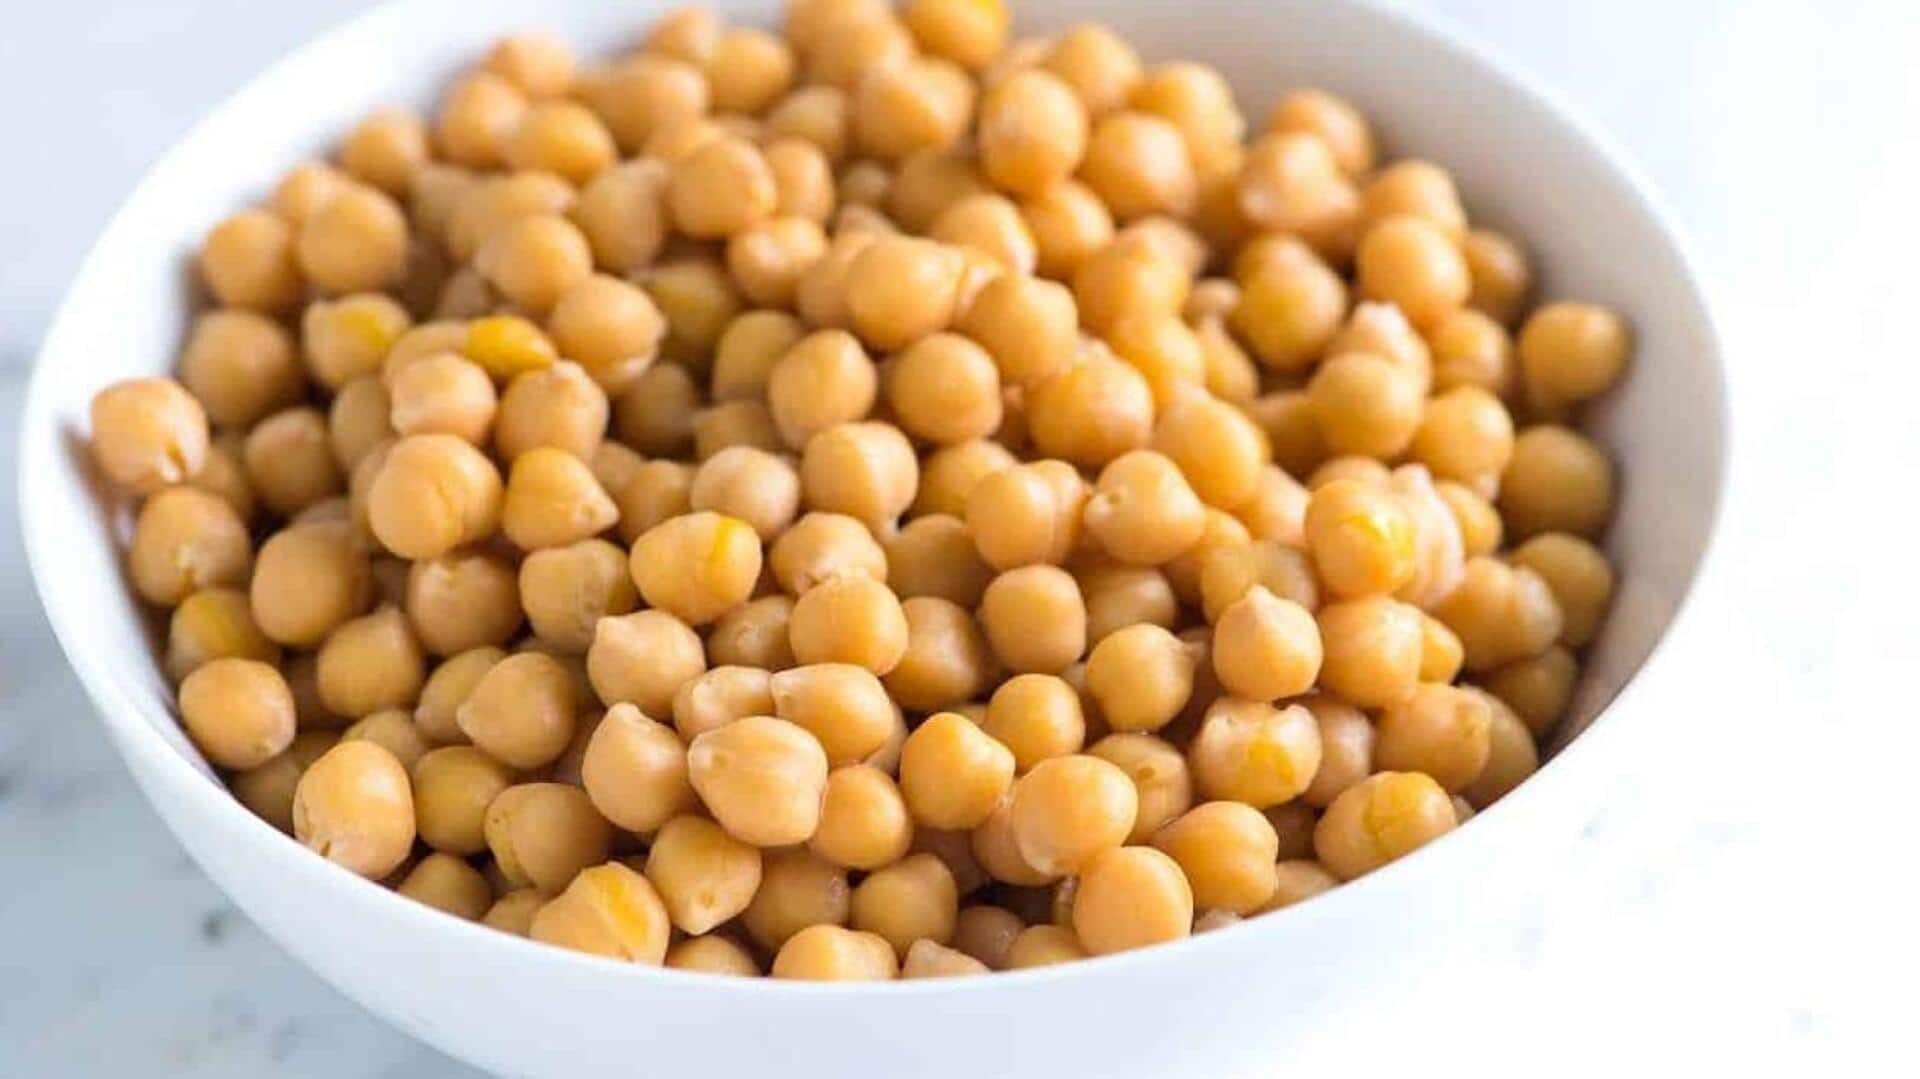 Indulge in chickpea vegan delights for good health